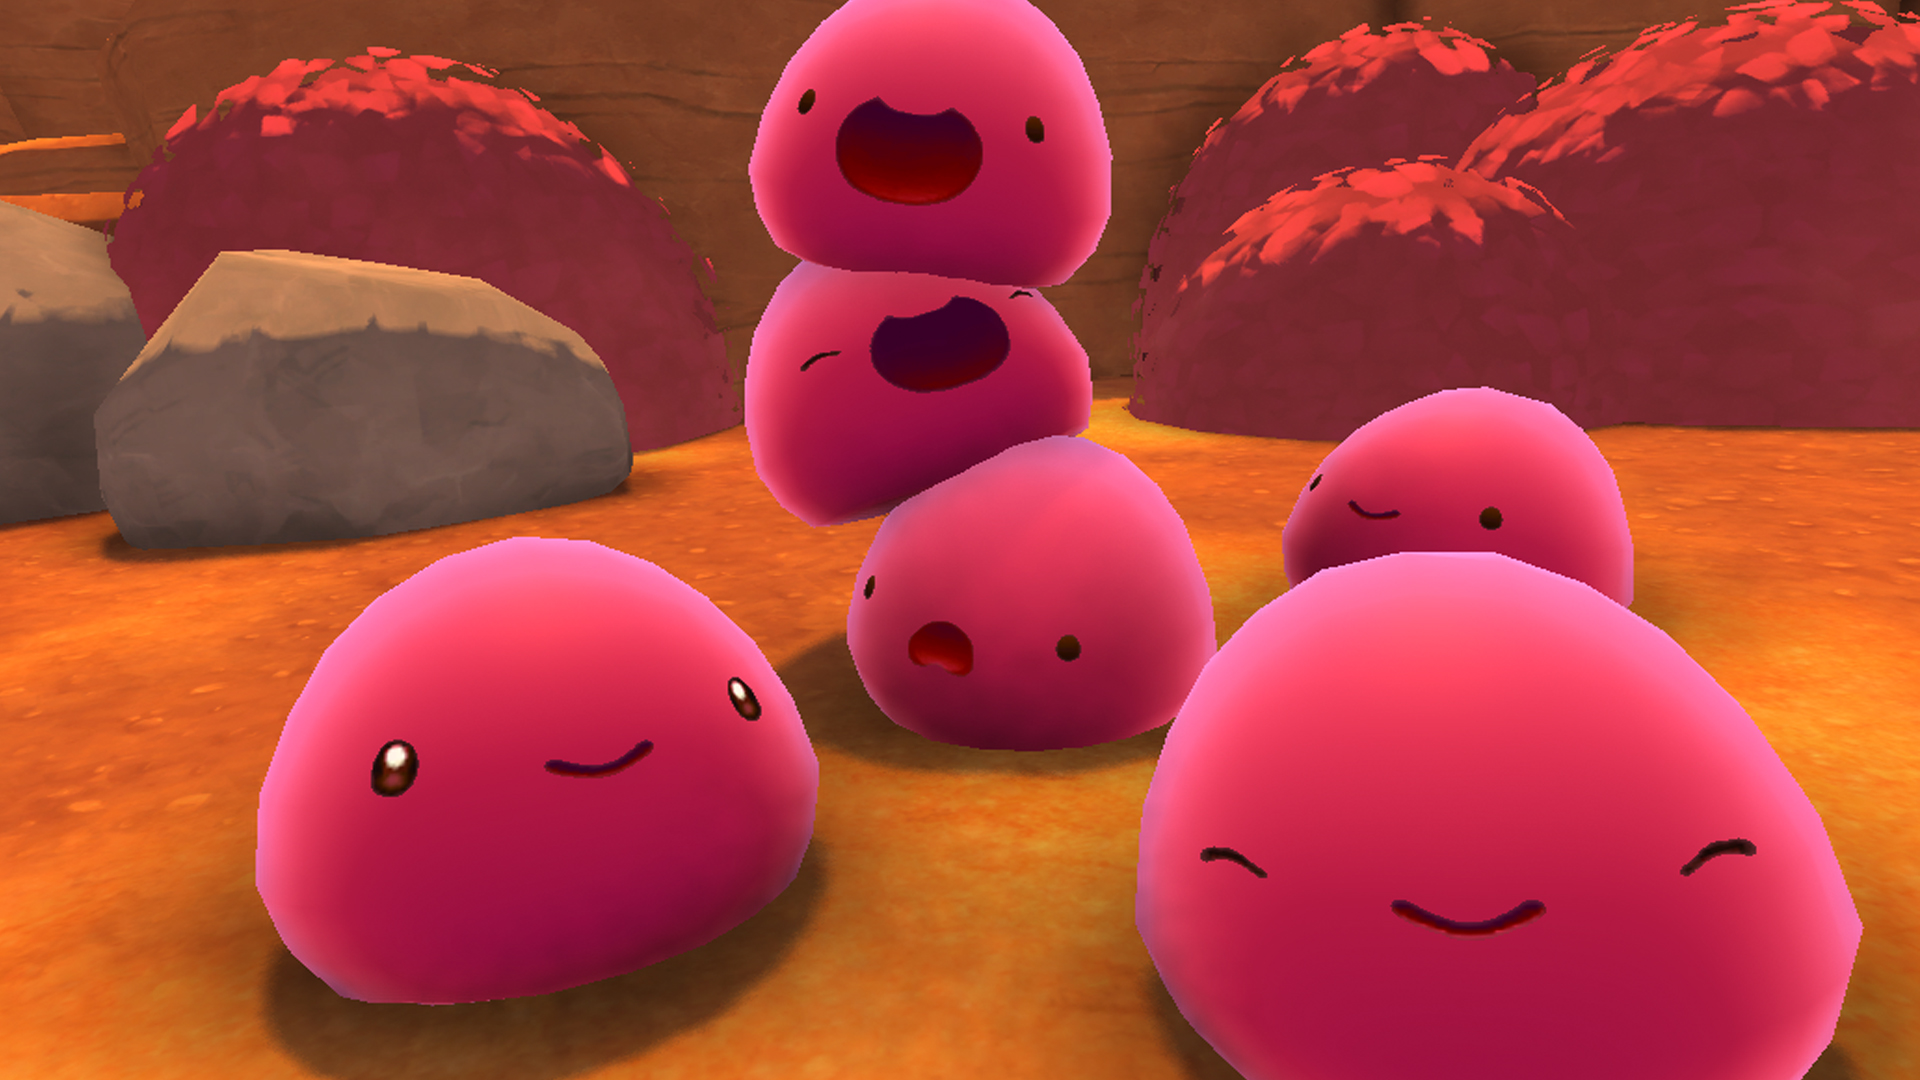 all slimes in slime rancher download free